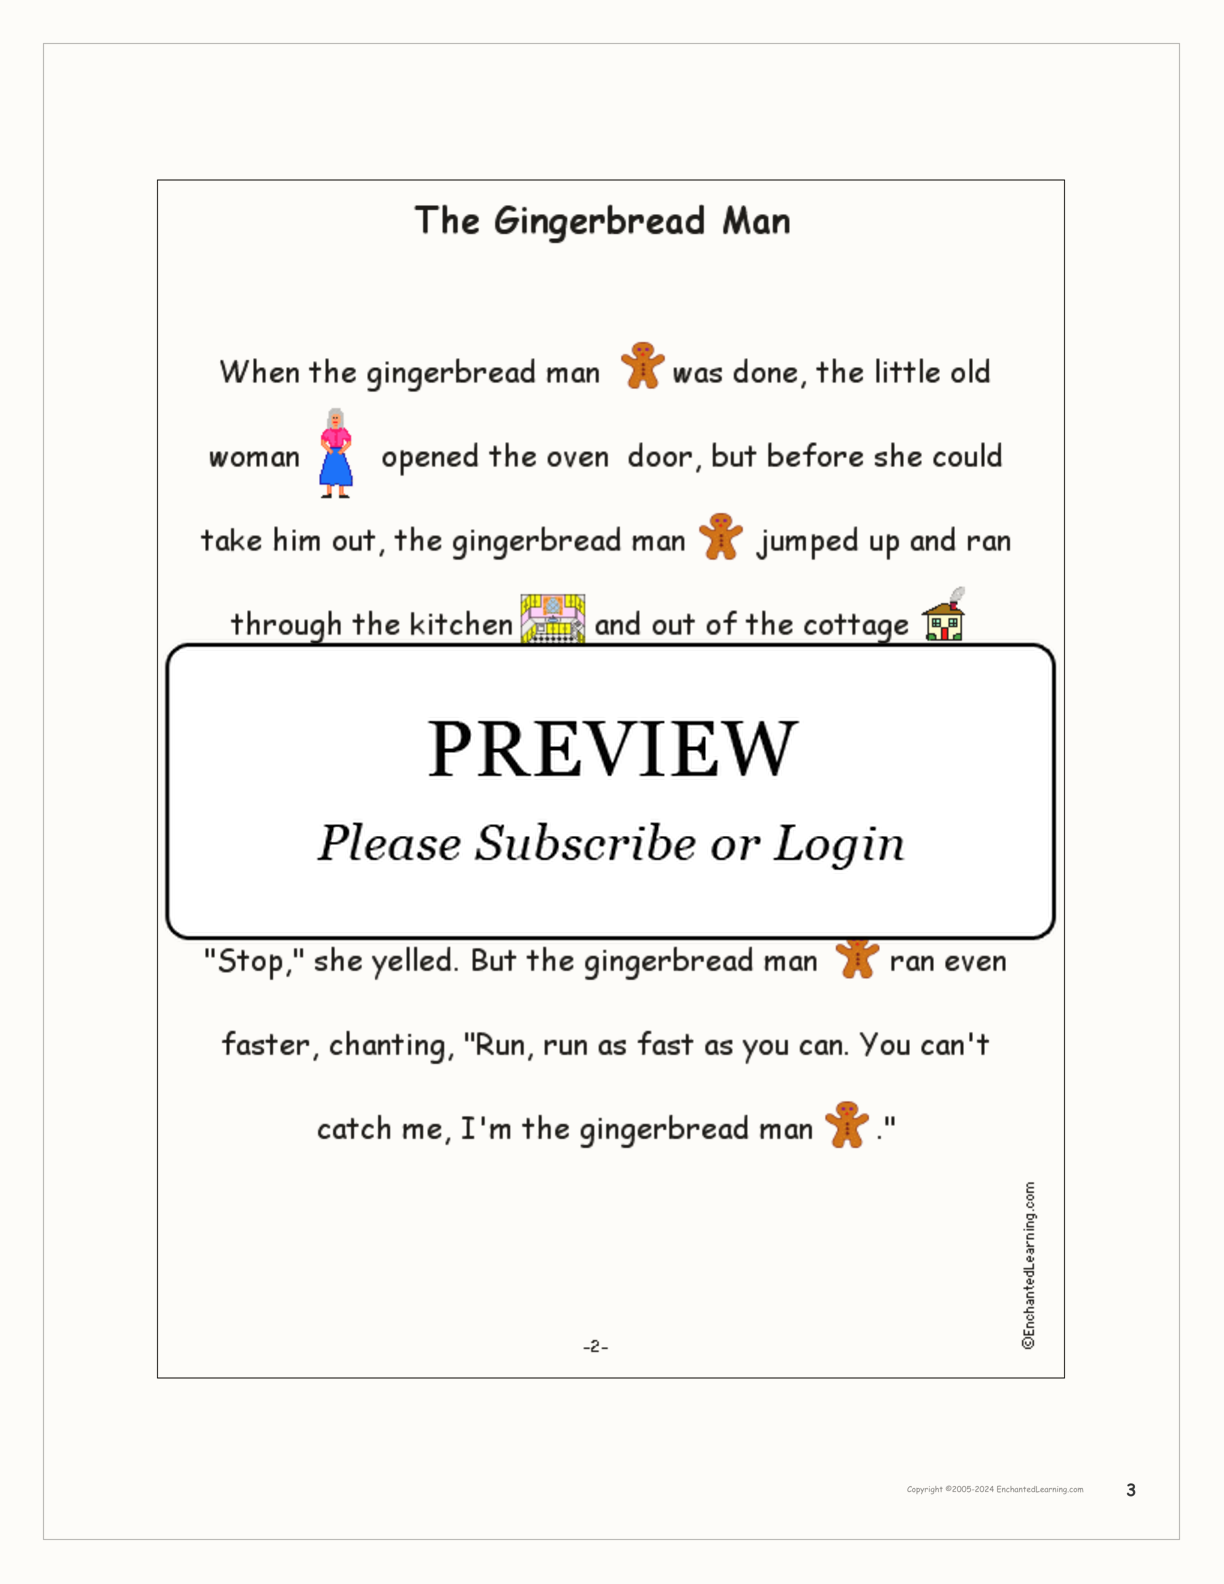 'The Gingerbread Man' Book interactive printout page 3